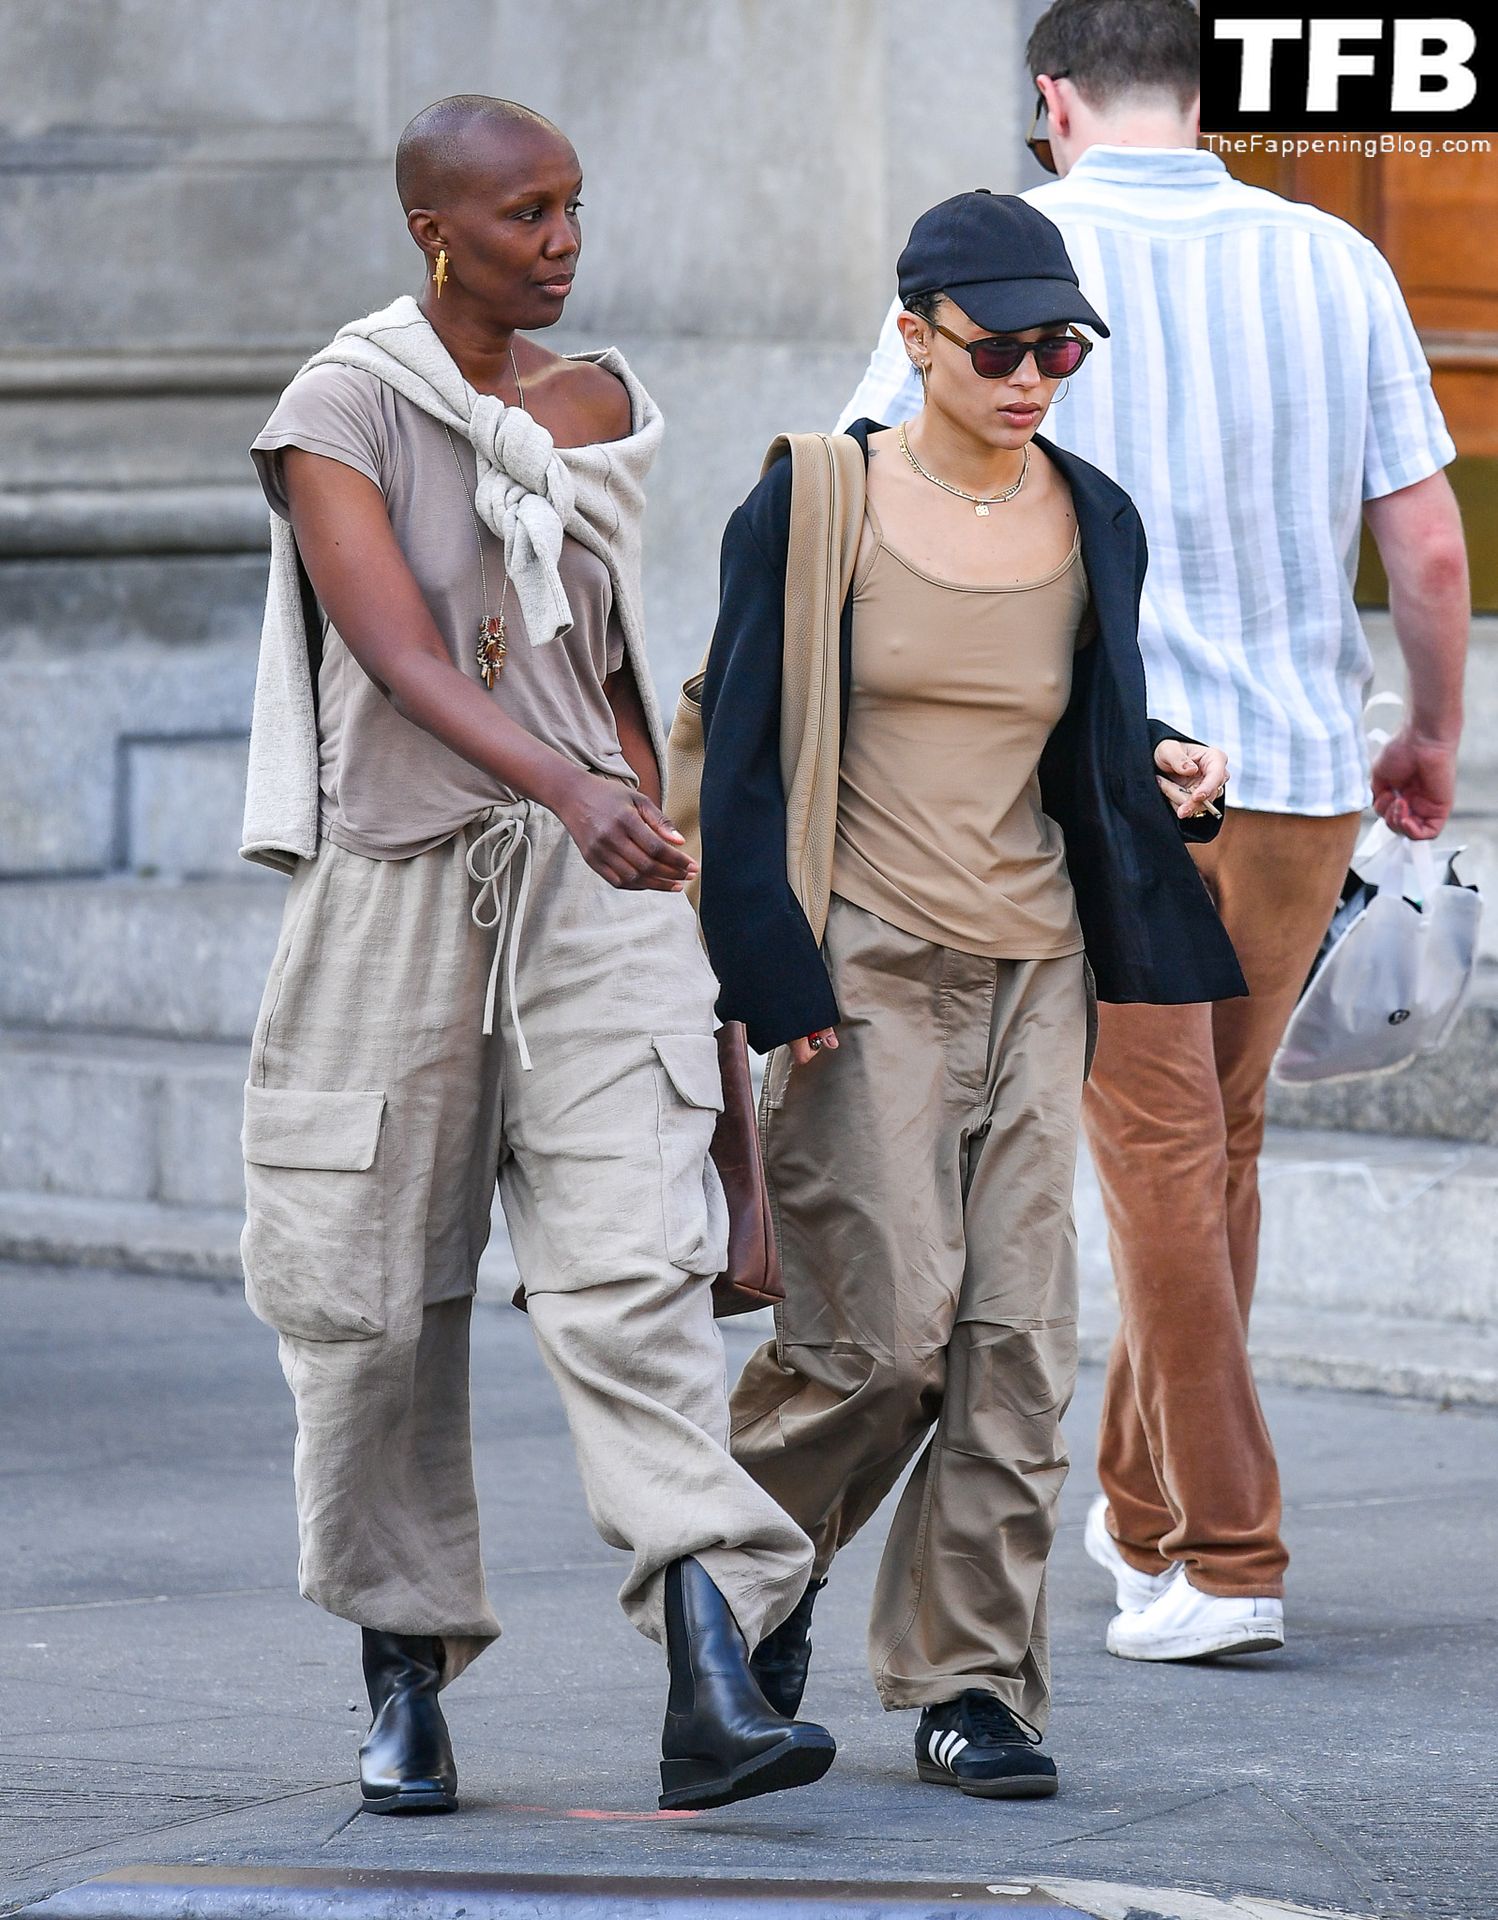 Zoe Kravitz Sexy Tits The Fappening Blog 11 - Braless Zoe Kravitz Steps Out With a Friend in NYC (13 Photos)